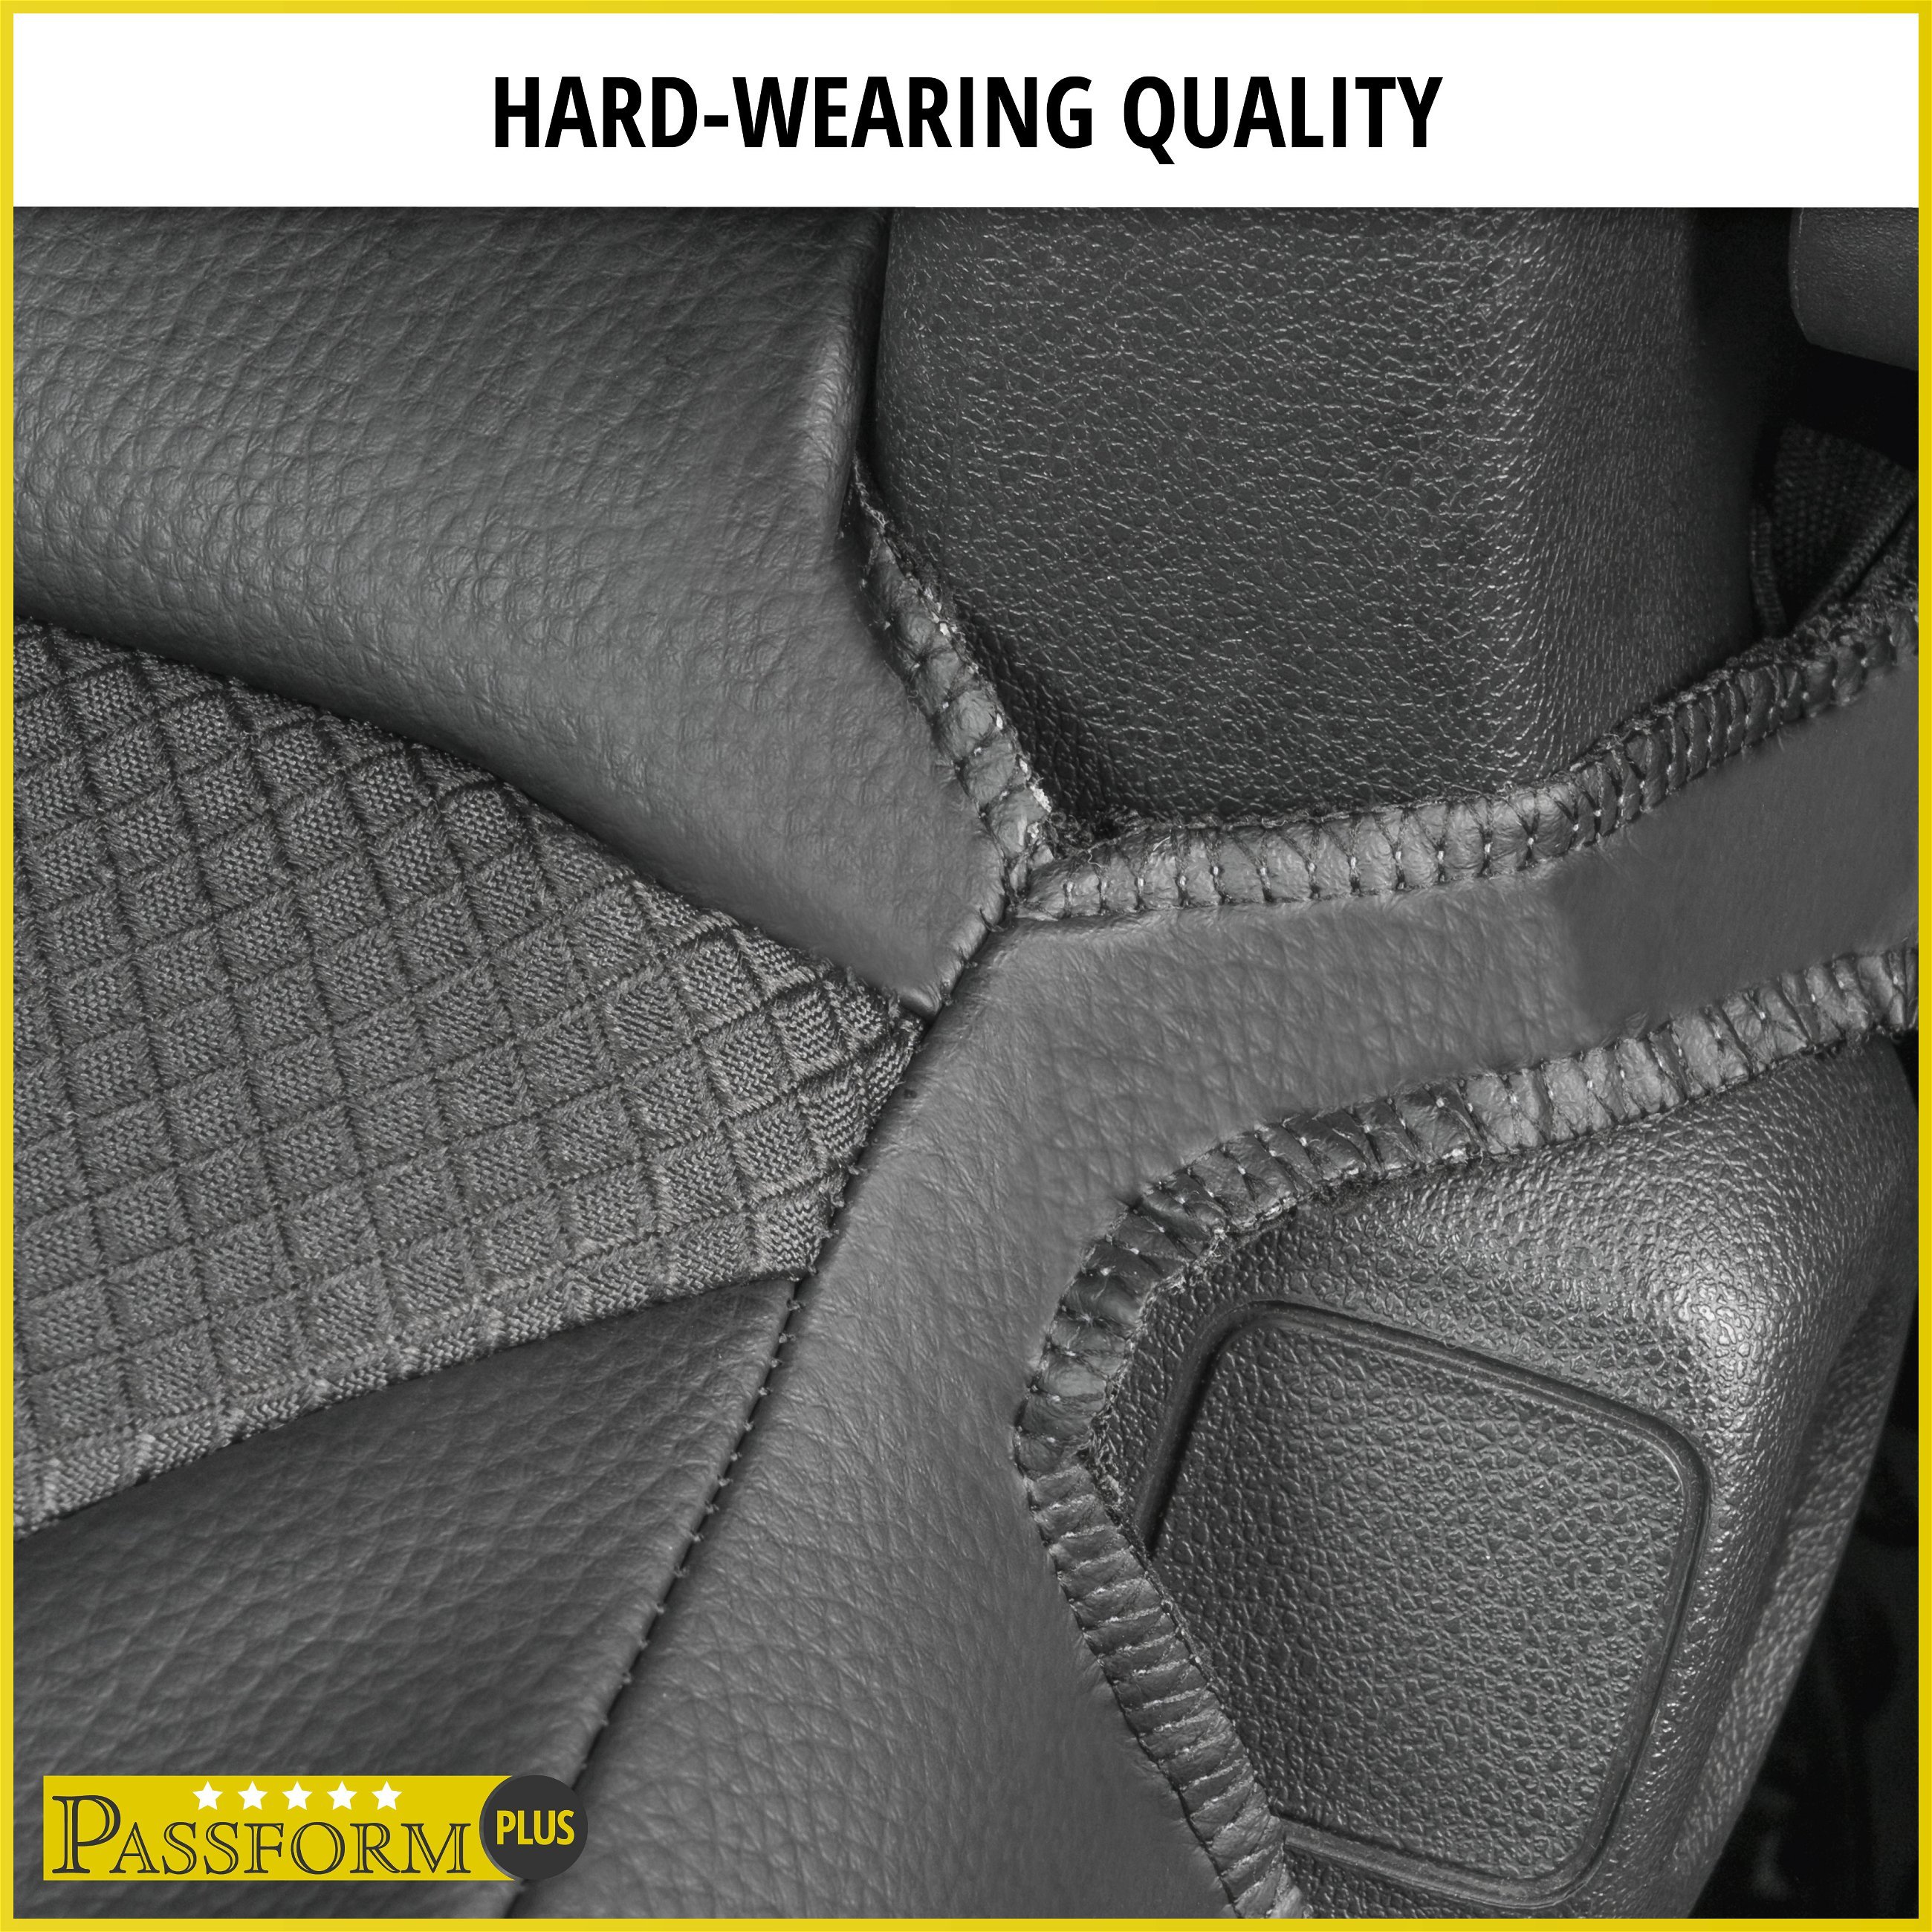 Premium Seat Cover for Peugeot Boxer 2006-Today, 1 single seat cover front + armrest cover, 1 double bench cover